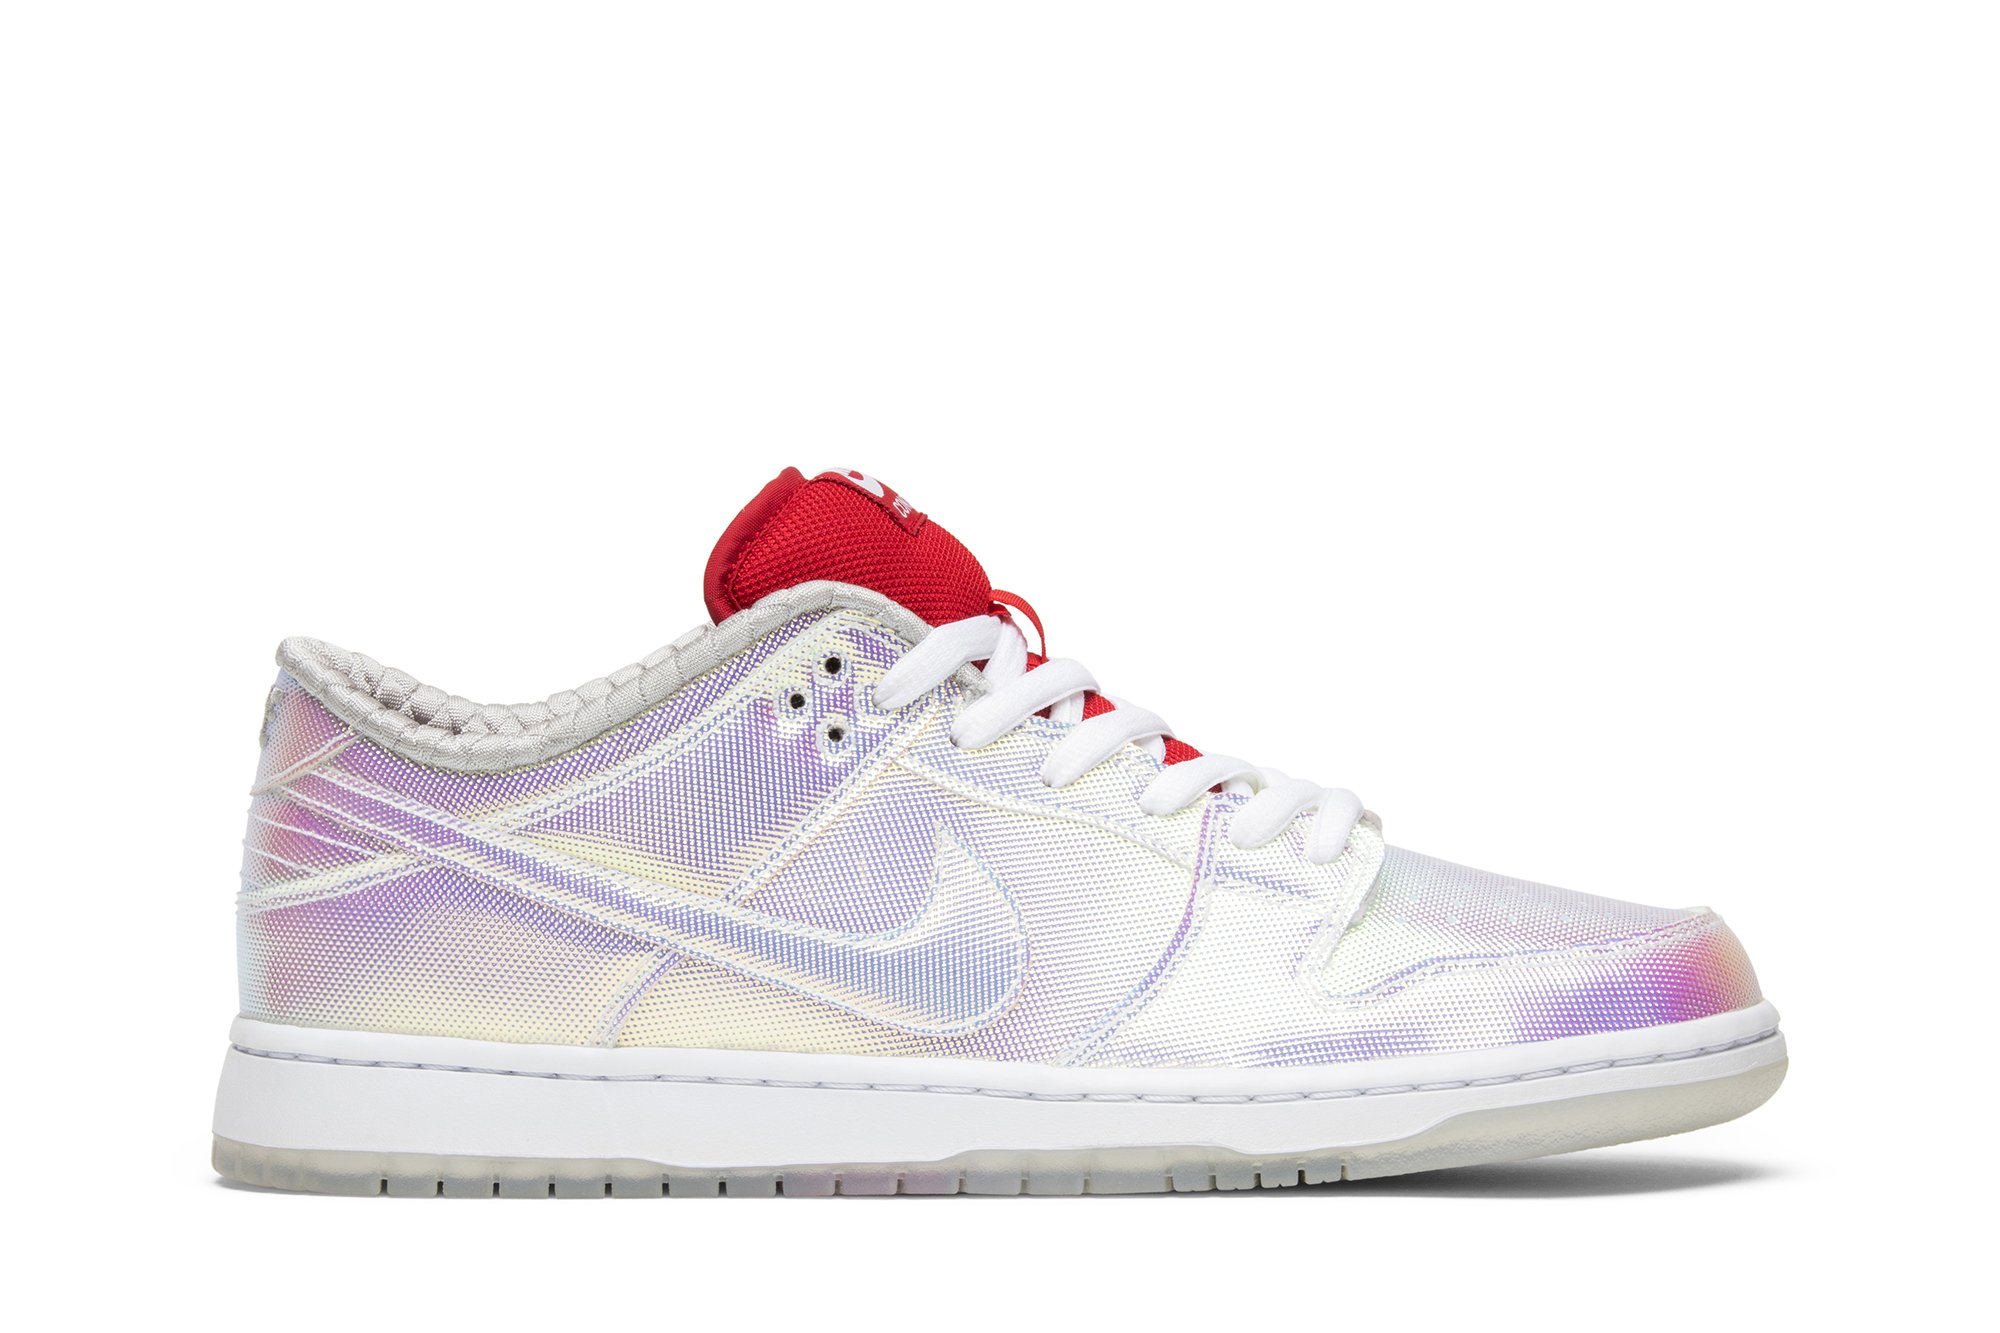 Nike SB Concepts dunk low “ HOLY GRAIL “